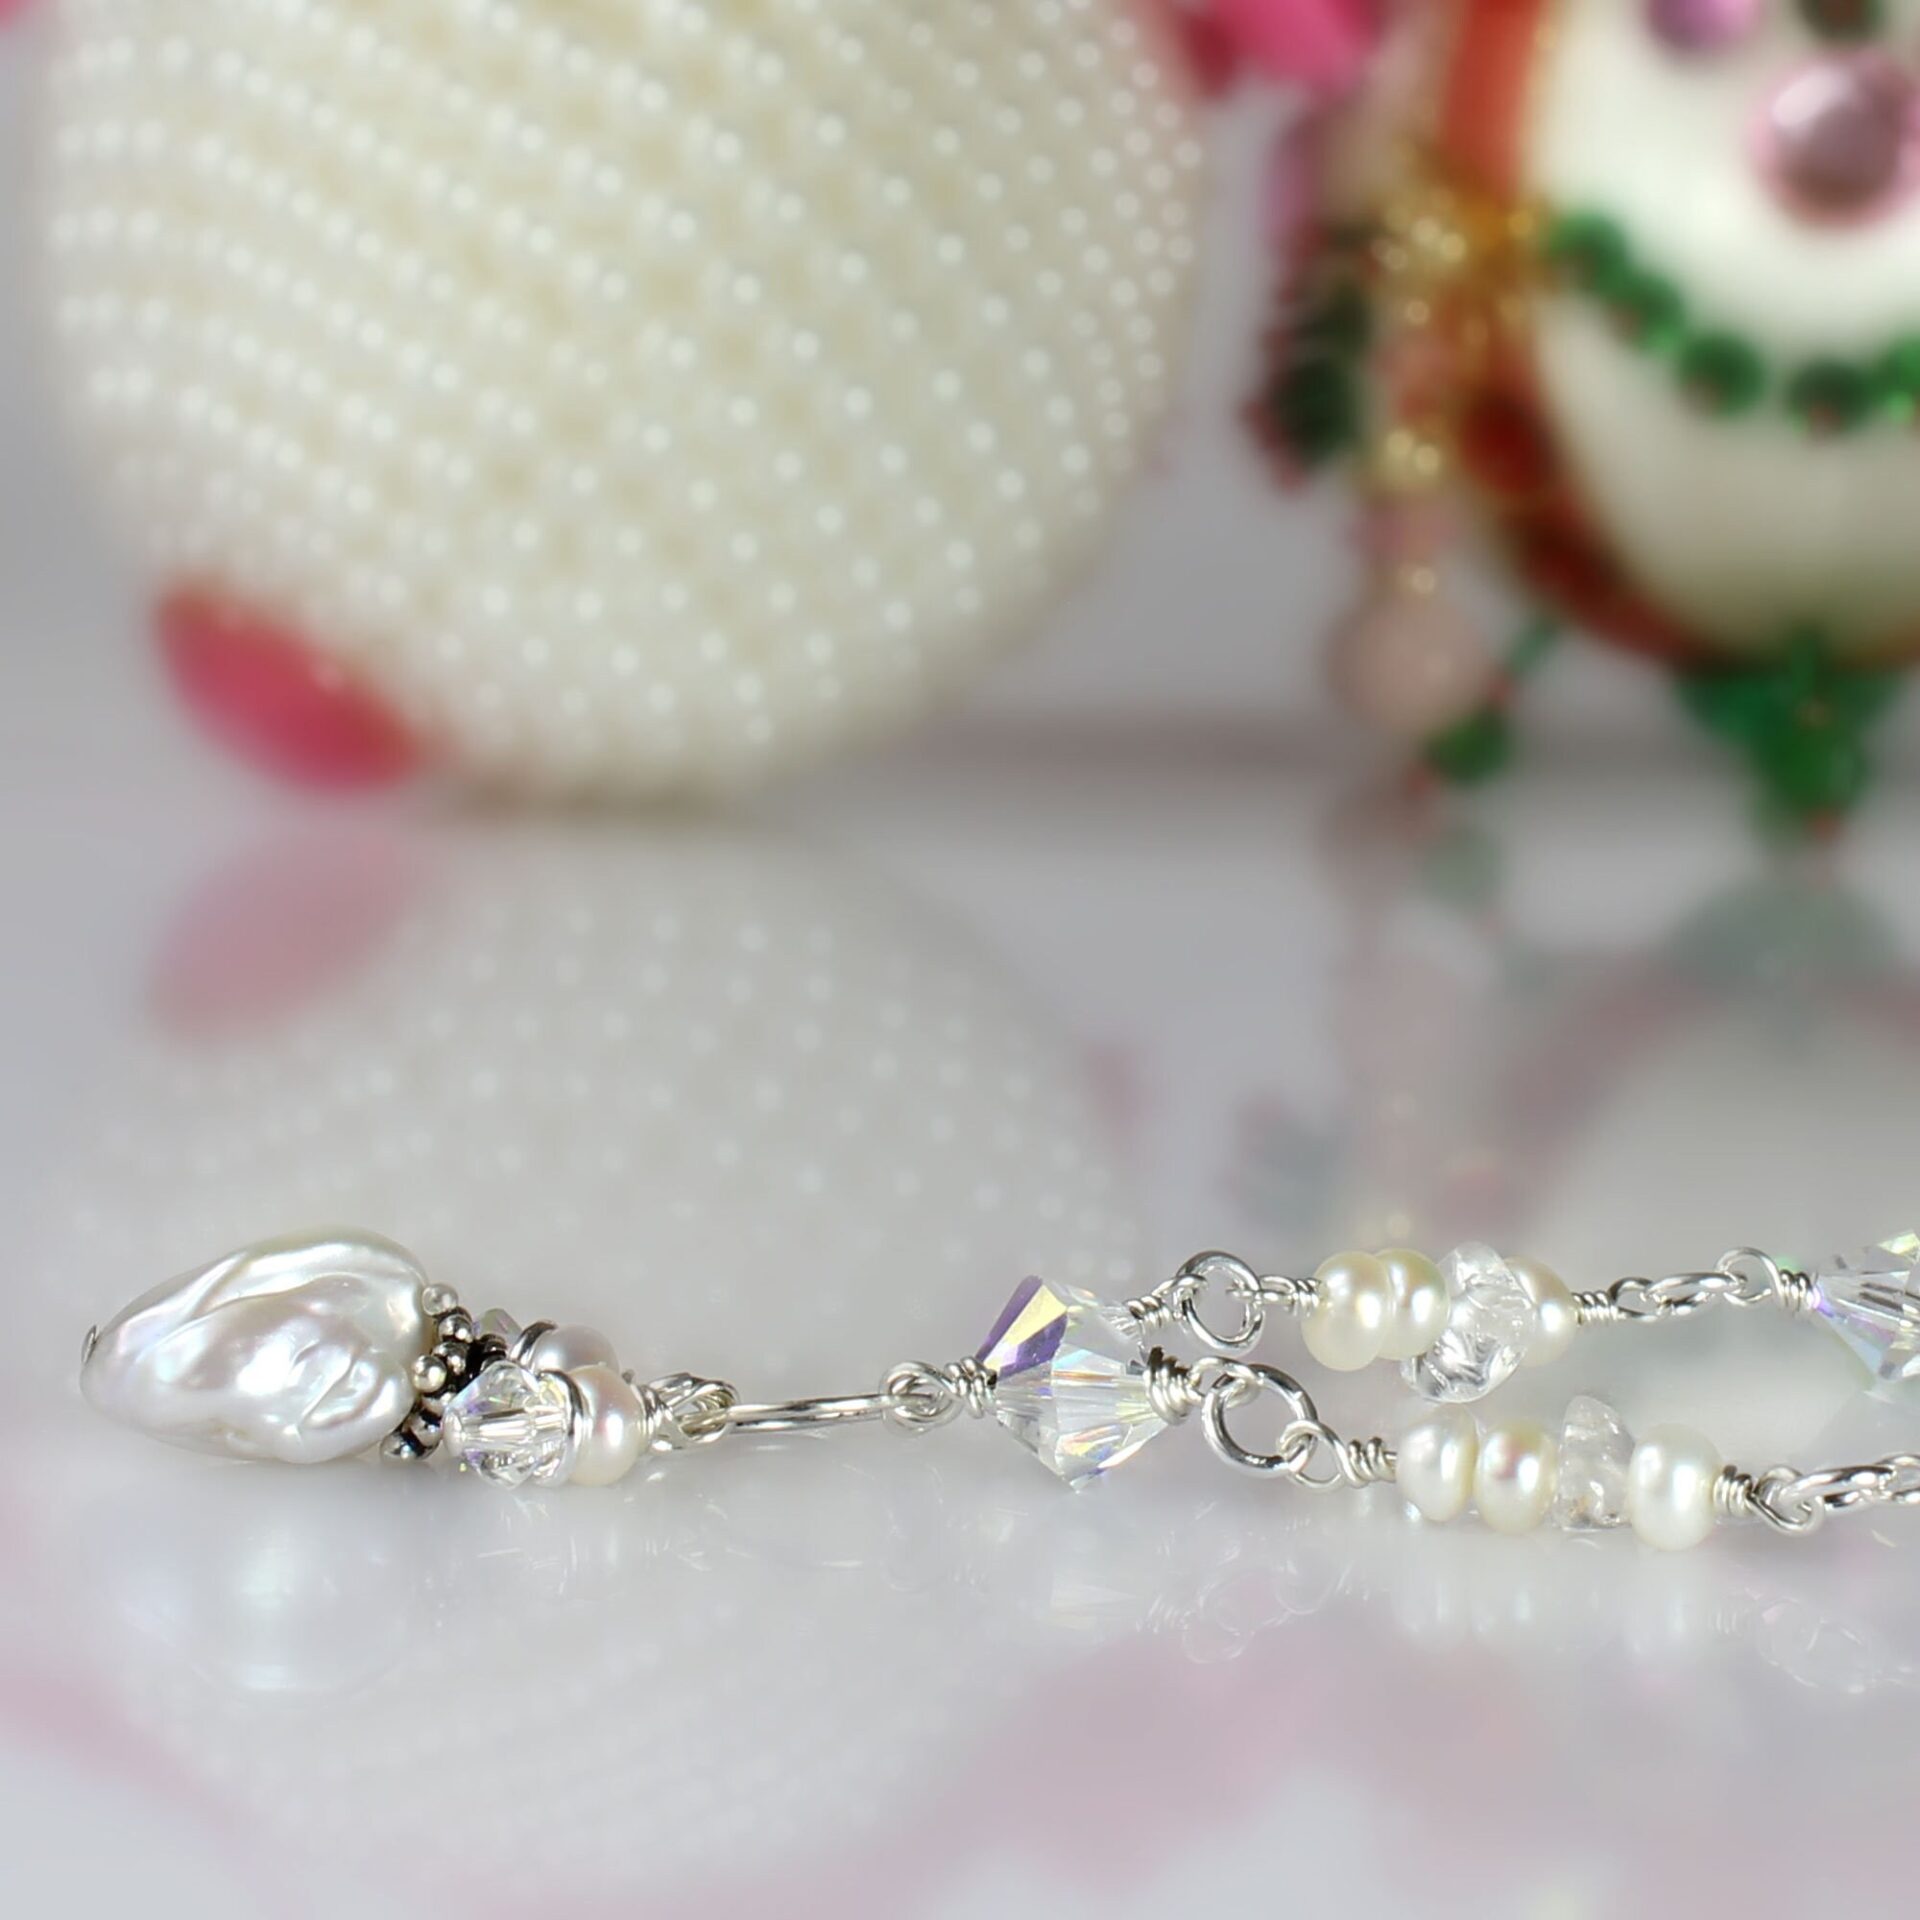 Keshi Pearl and Crystal Necklace